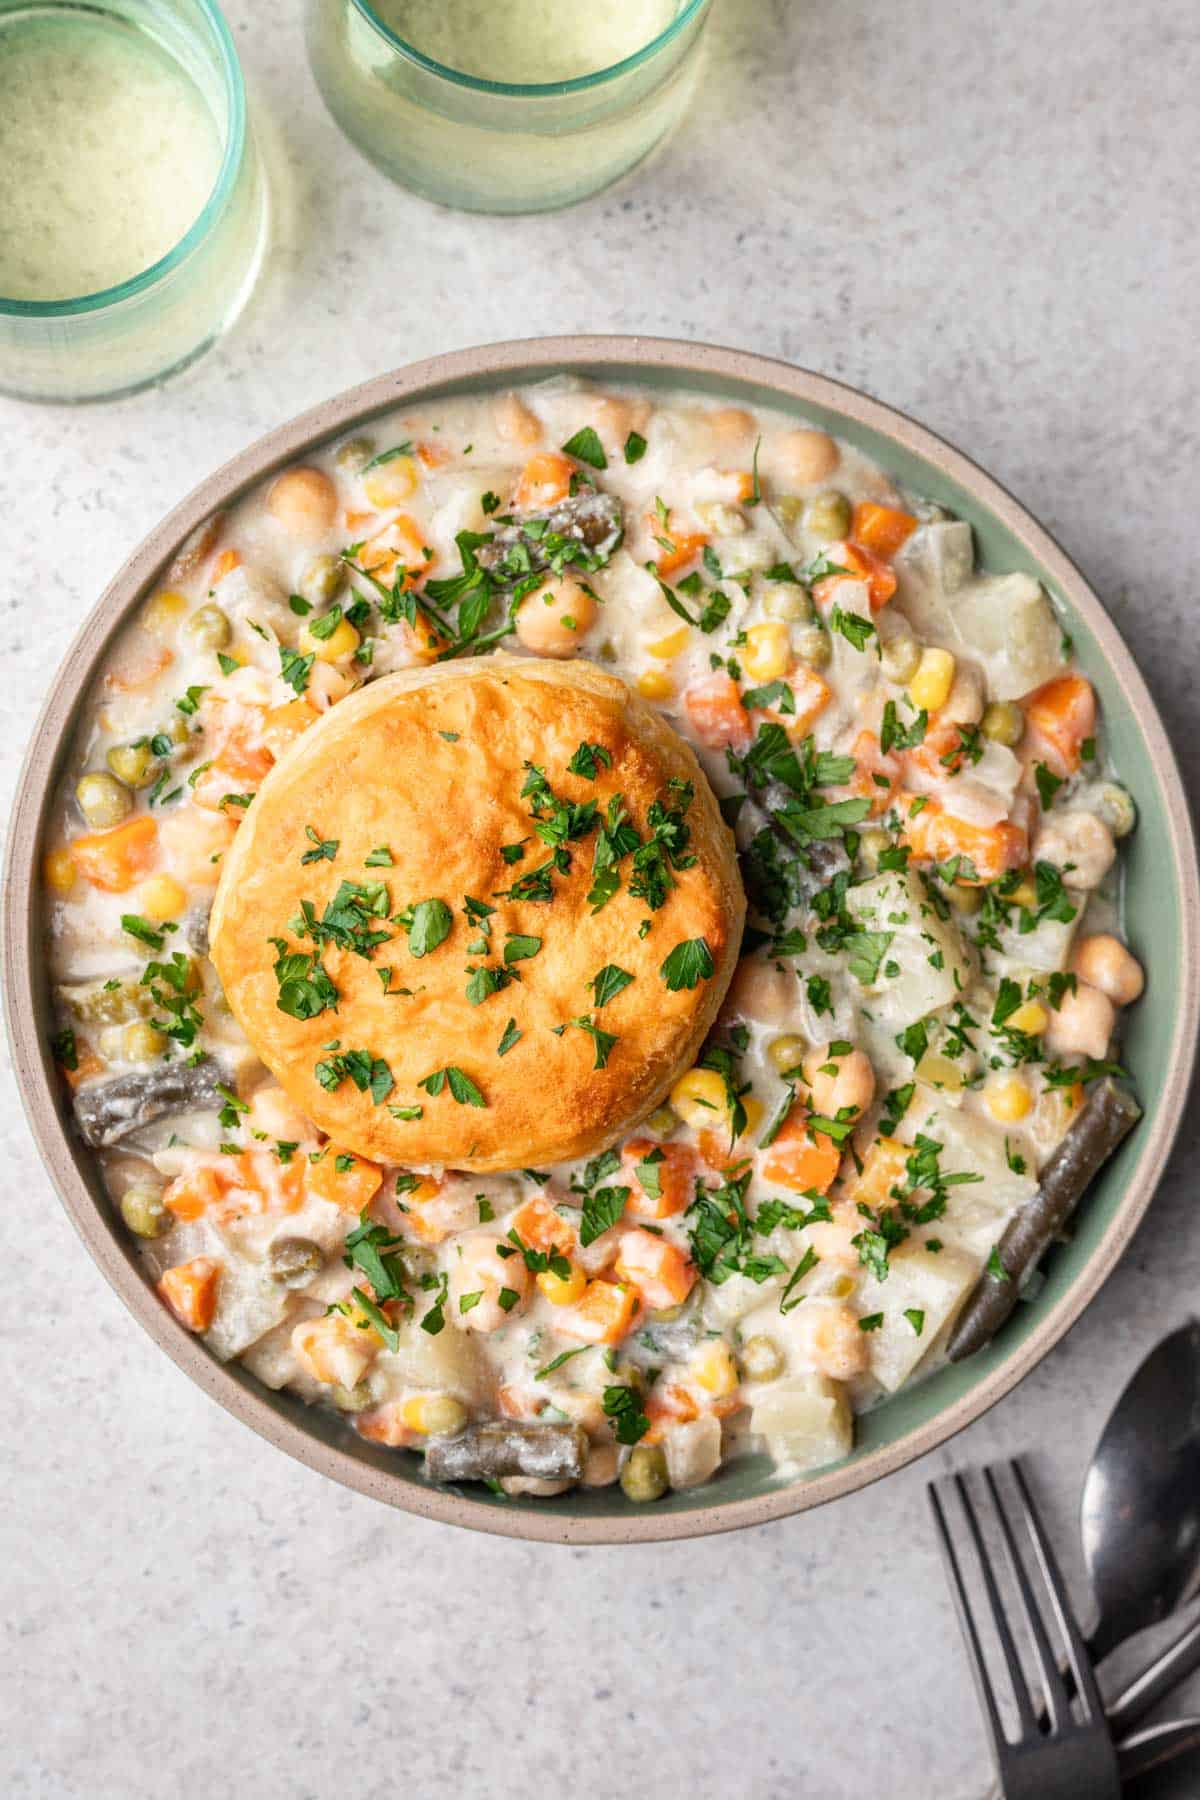 Bowl of vegan pot pie filling with biscuits.